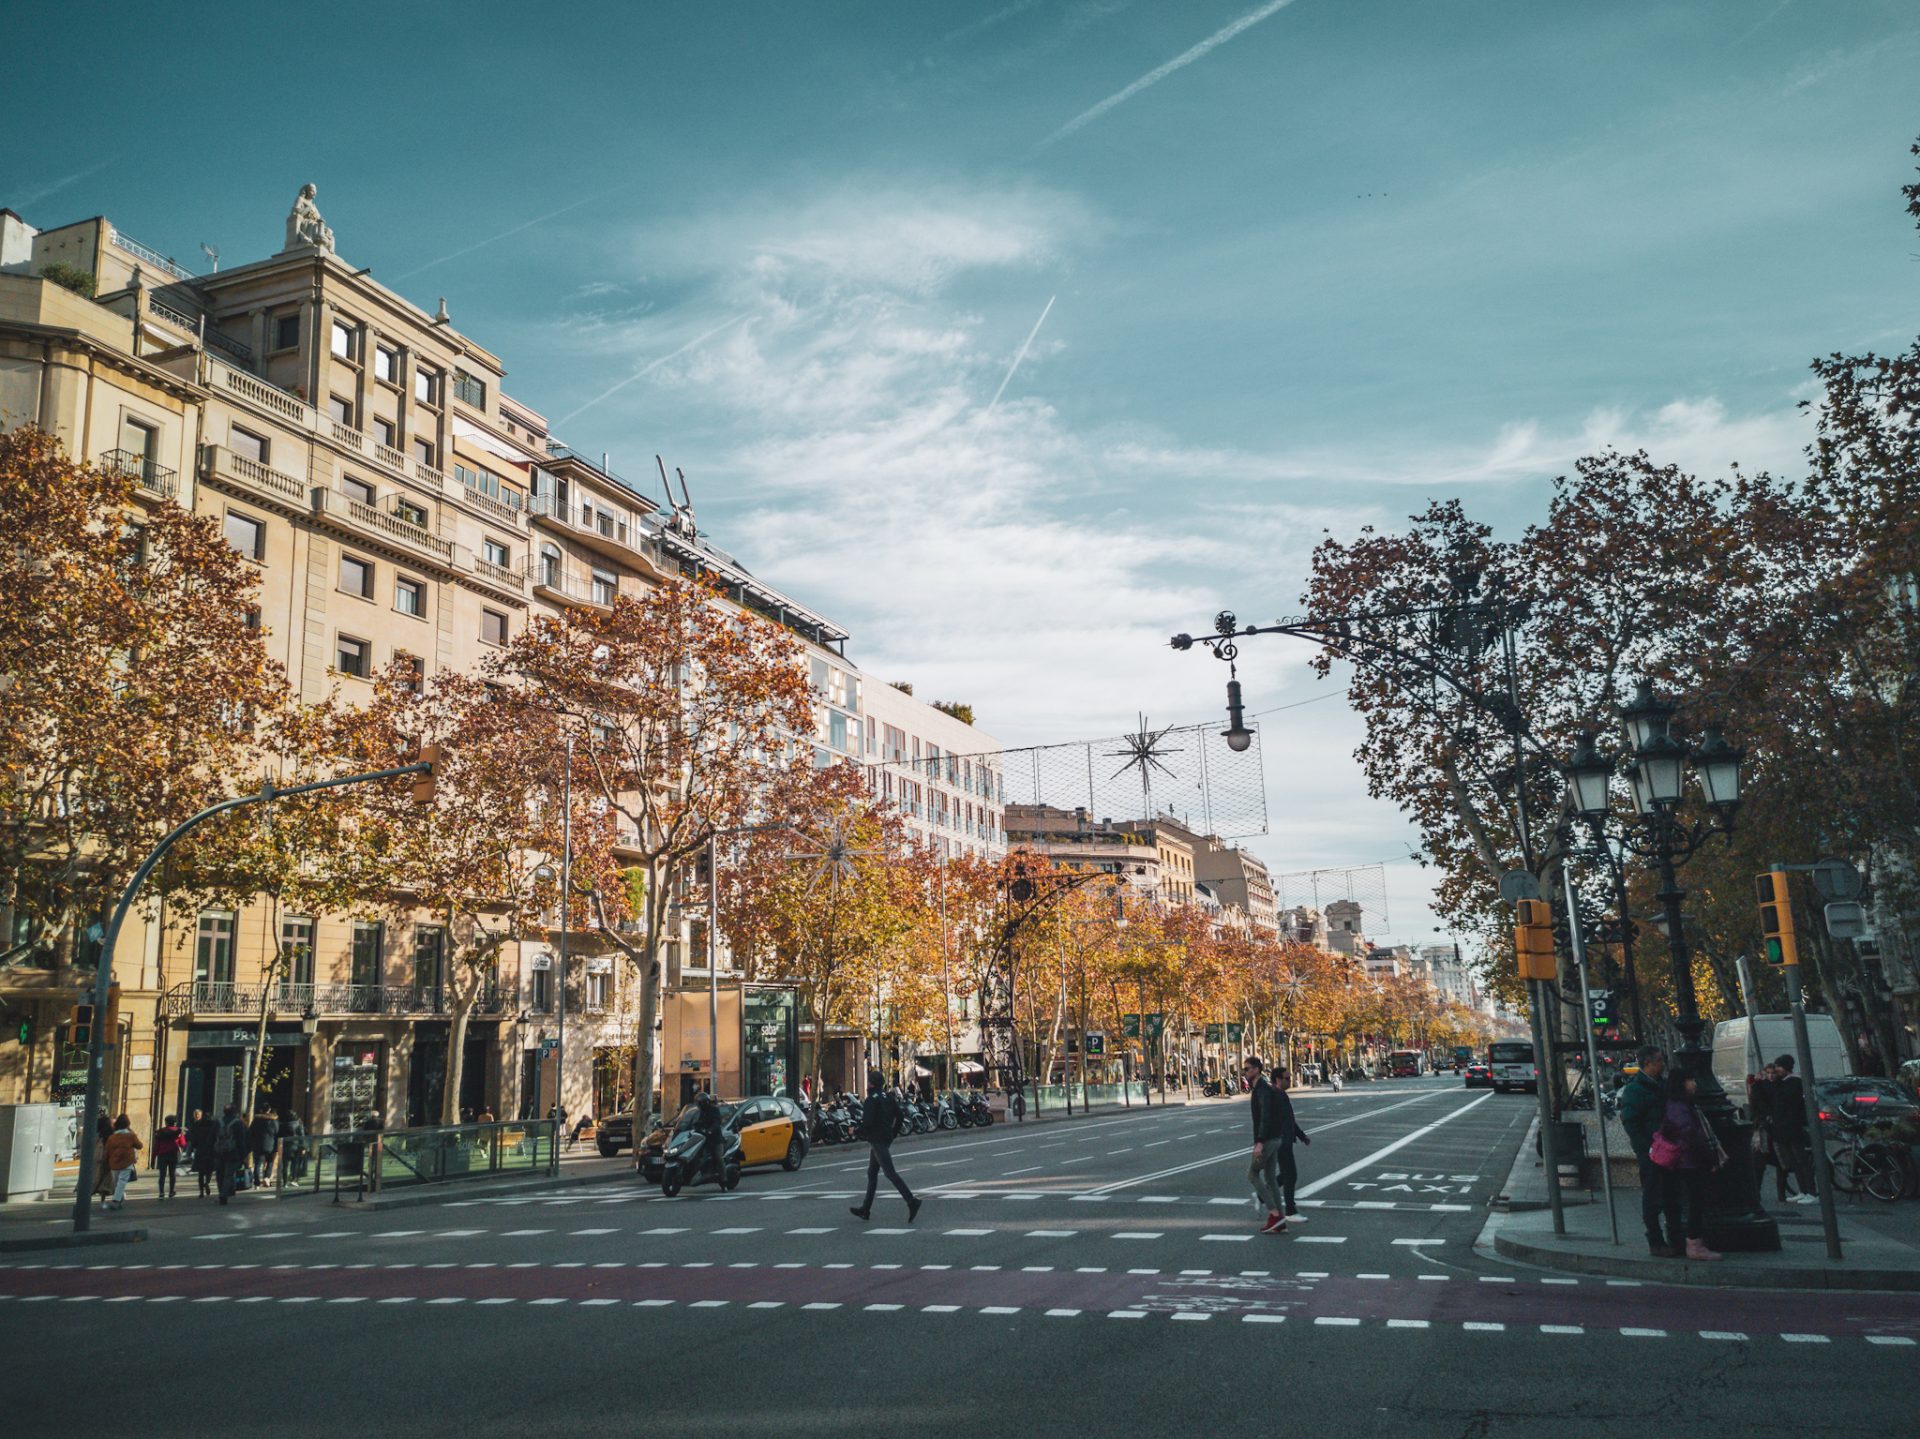 La Perla And Boss Shops At Passeig De Gracia Shopping Street In Barcelona  Spain Stock Photo - Download Image Now - iStock